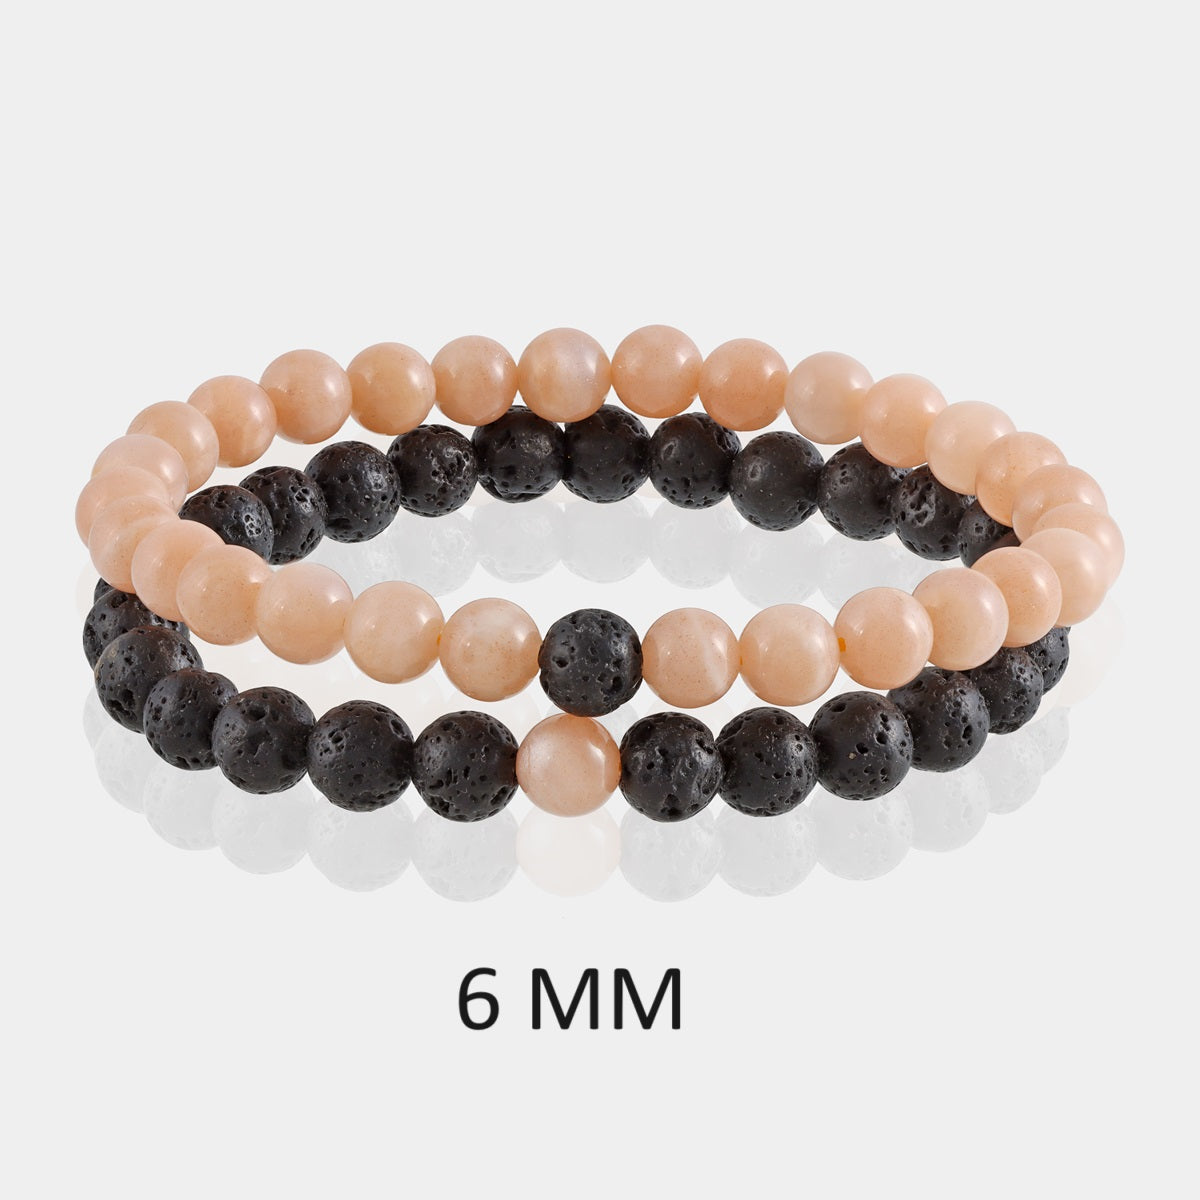 Detailed view of a 6mm Peach Moonstone bead, showcasing the exquisite craftsmanship and soothing peach hue in the bracelet combo